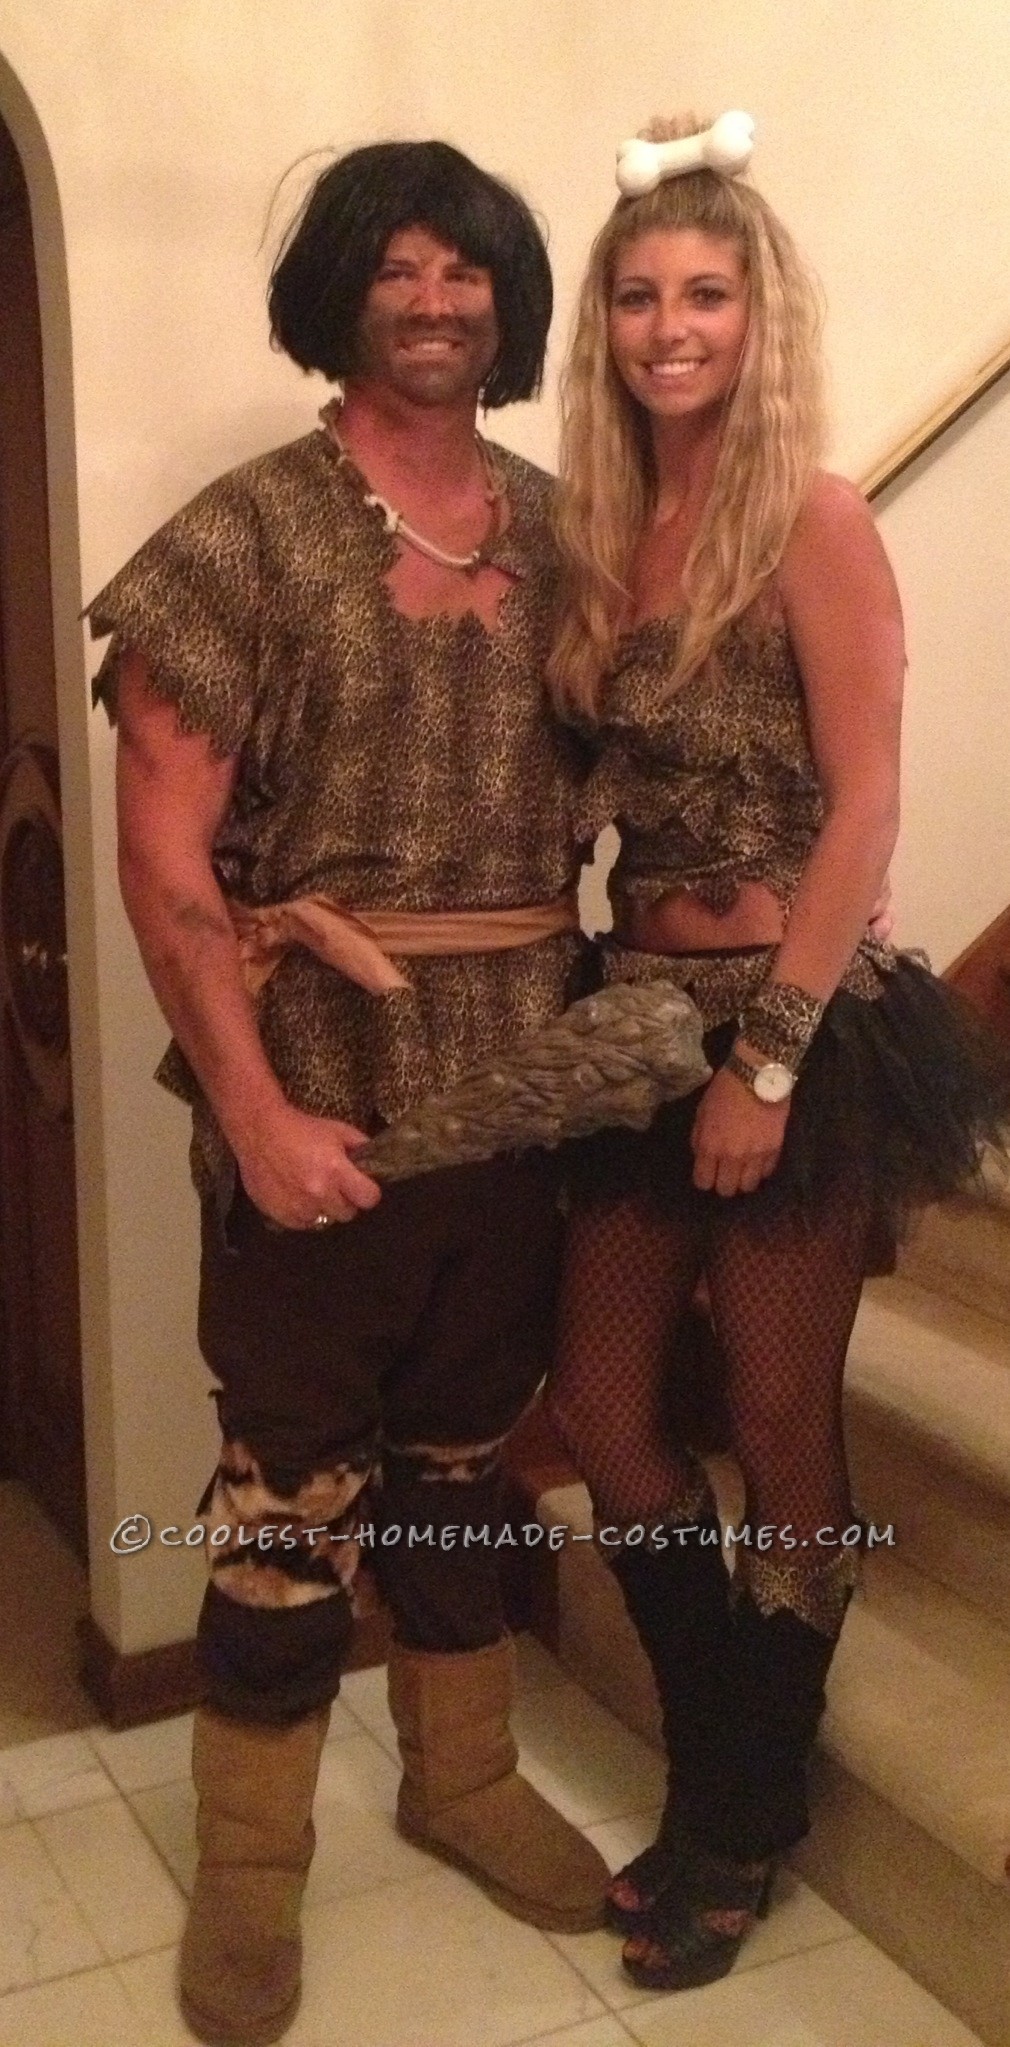 A lot of people thought we were pebbles and bam bam from the flintstones. The costumes were very last minute and easy to make. For the  Cave wom